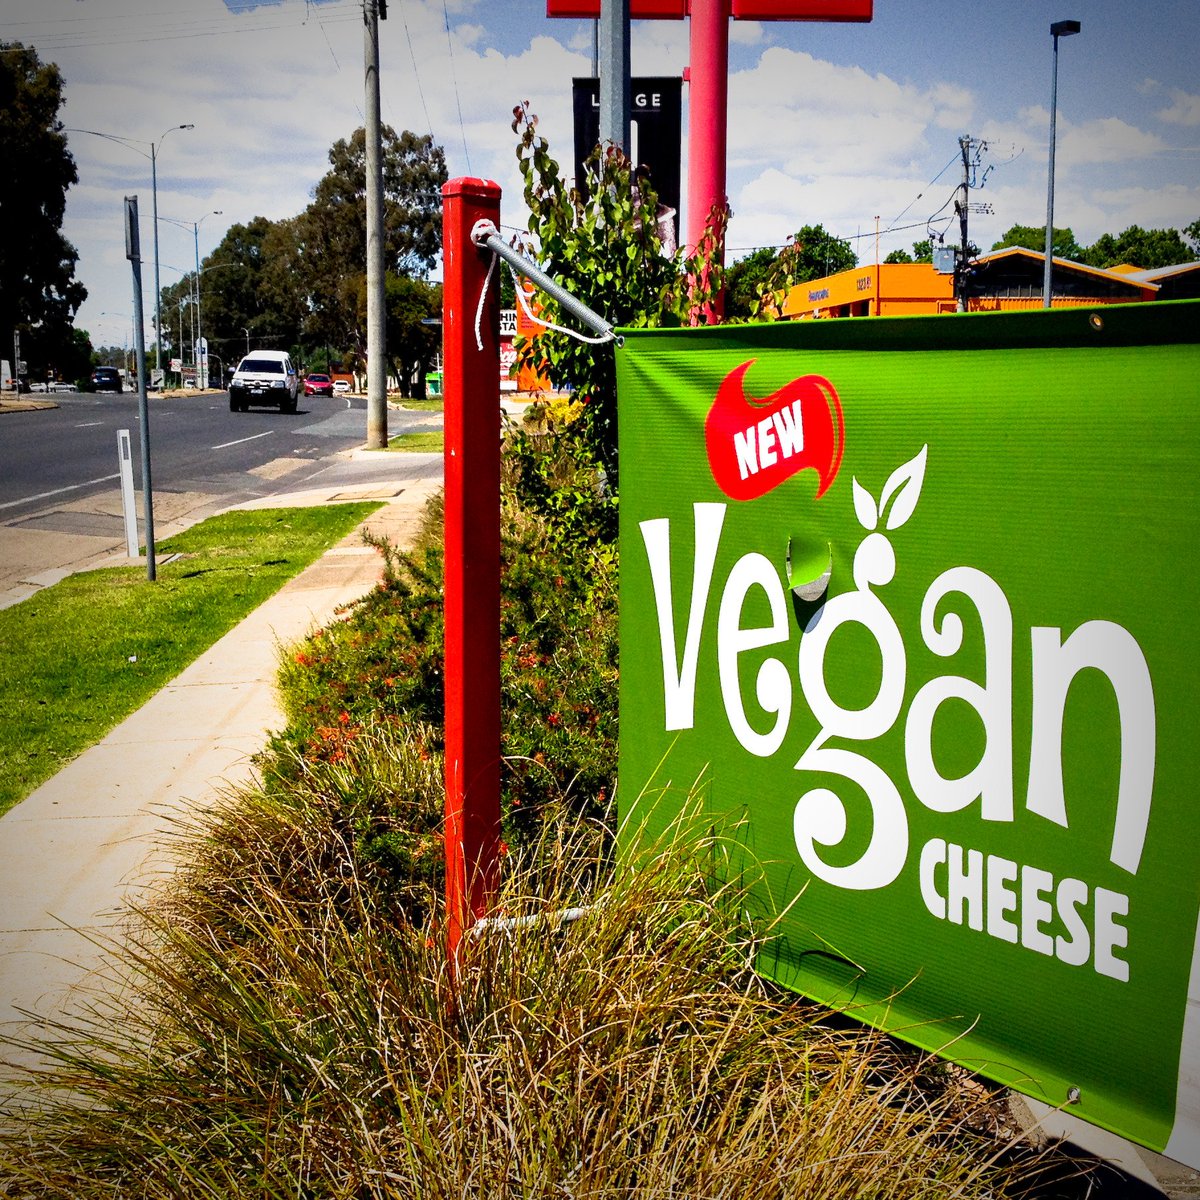 Collins Dictionary names 'VEGAN' a TOP WORD for 1918 the same month I keep seeing it pop-up around Wangaratta.....good to see the major Take-Away chains offer cruelty-free options... now just need the cafes of Wangtown to get on board too @wangchronicle